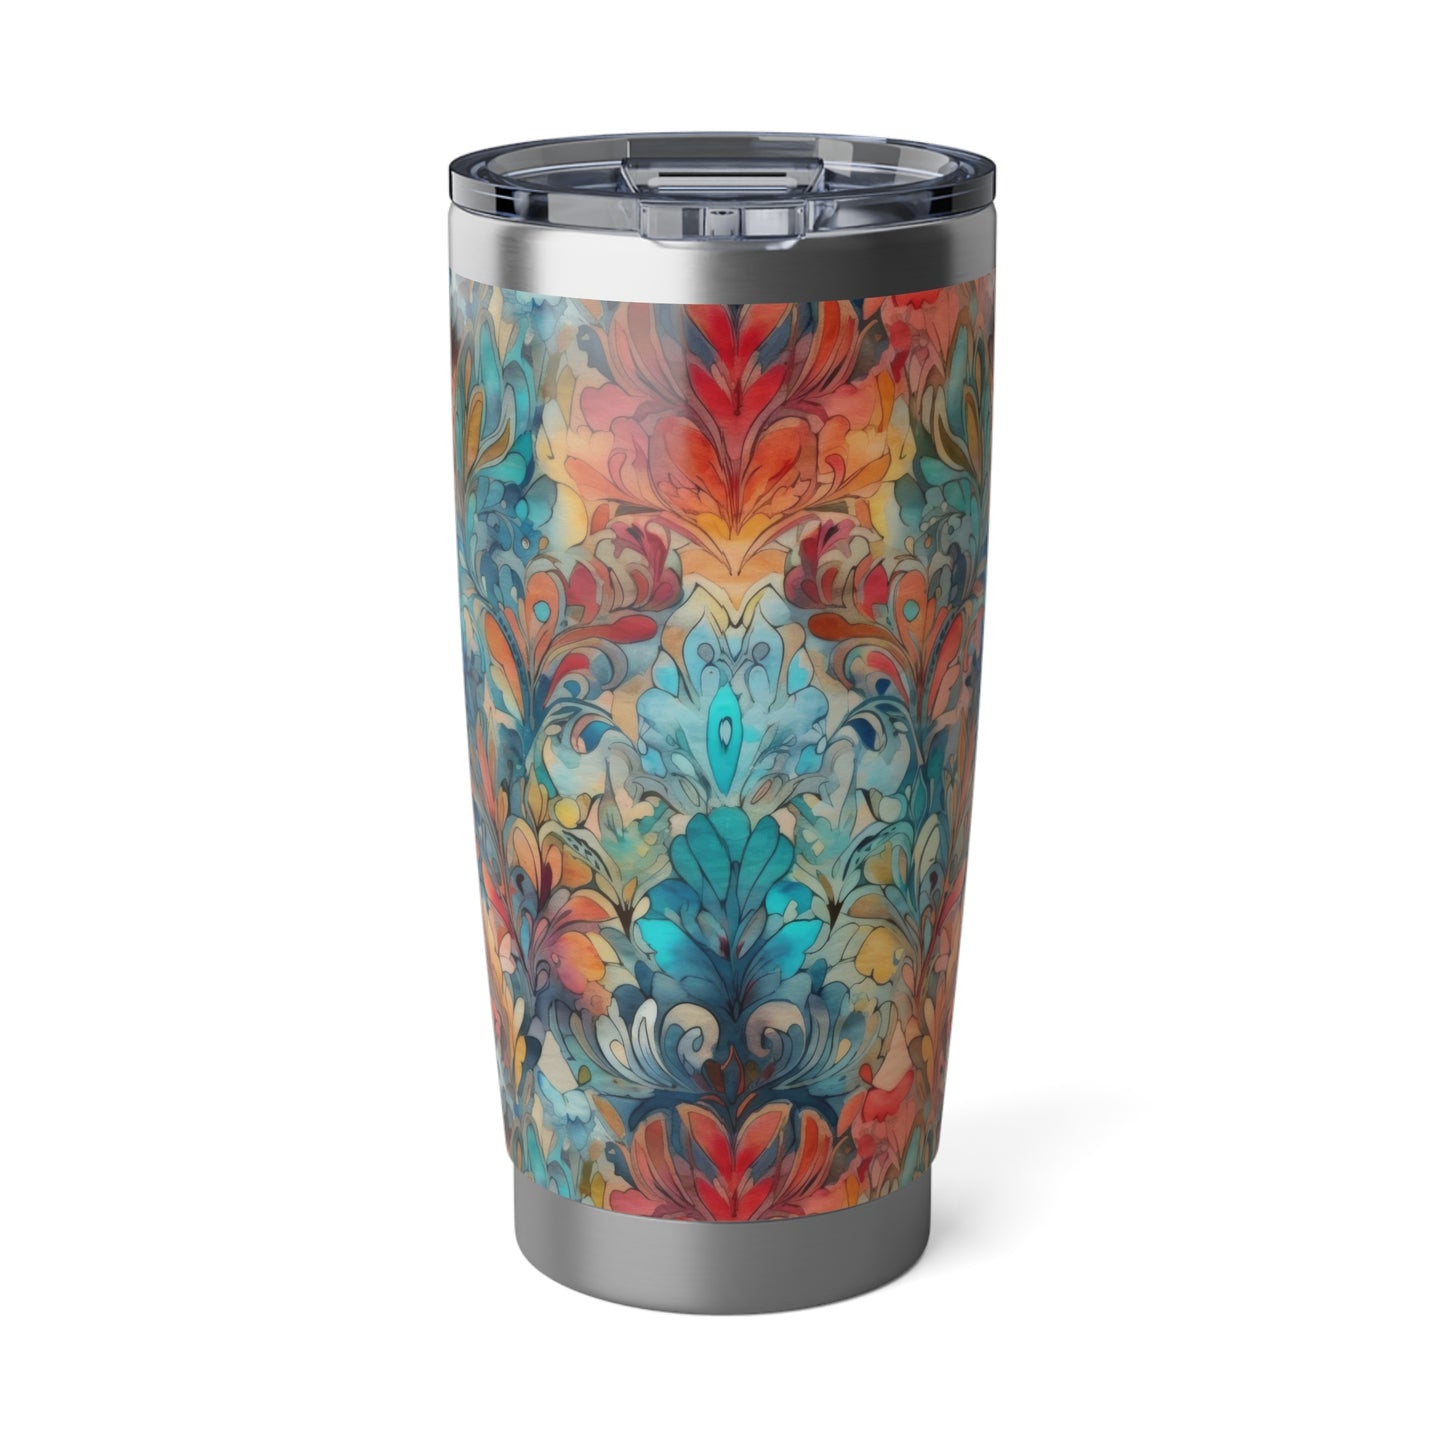 Tapestry Designs 2.6 - Vagabond 20oz Tumbler - Stainless Steel - Double Wall